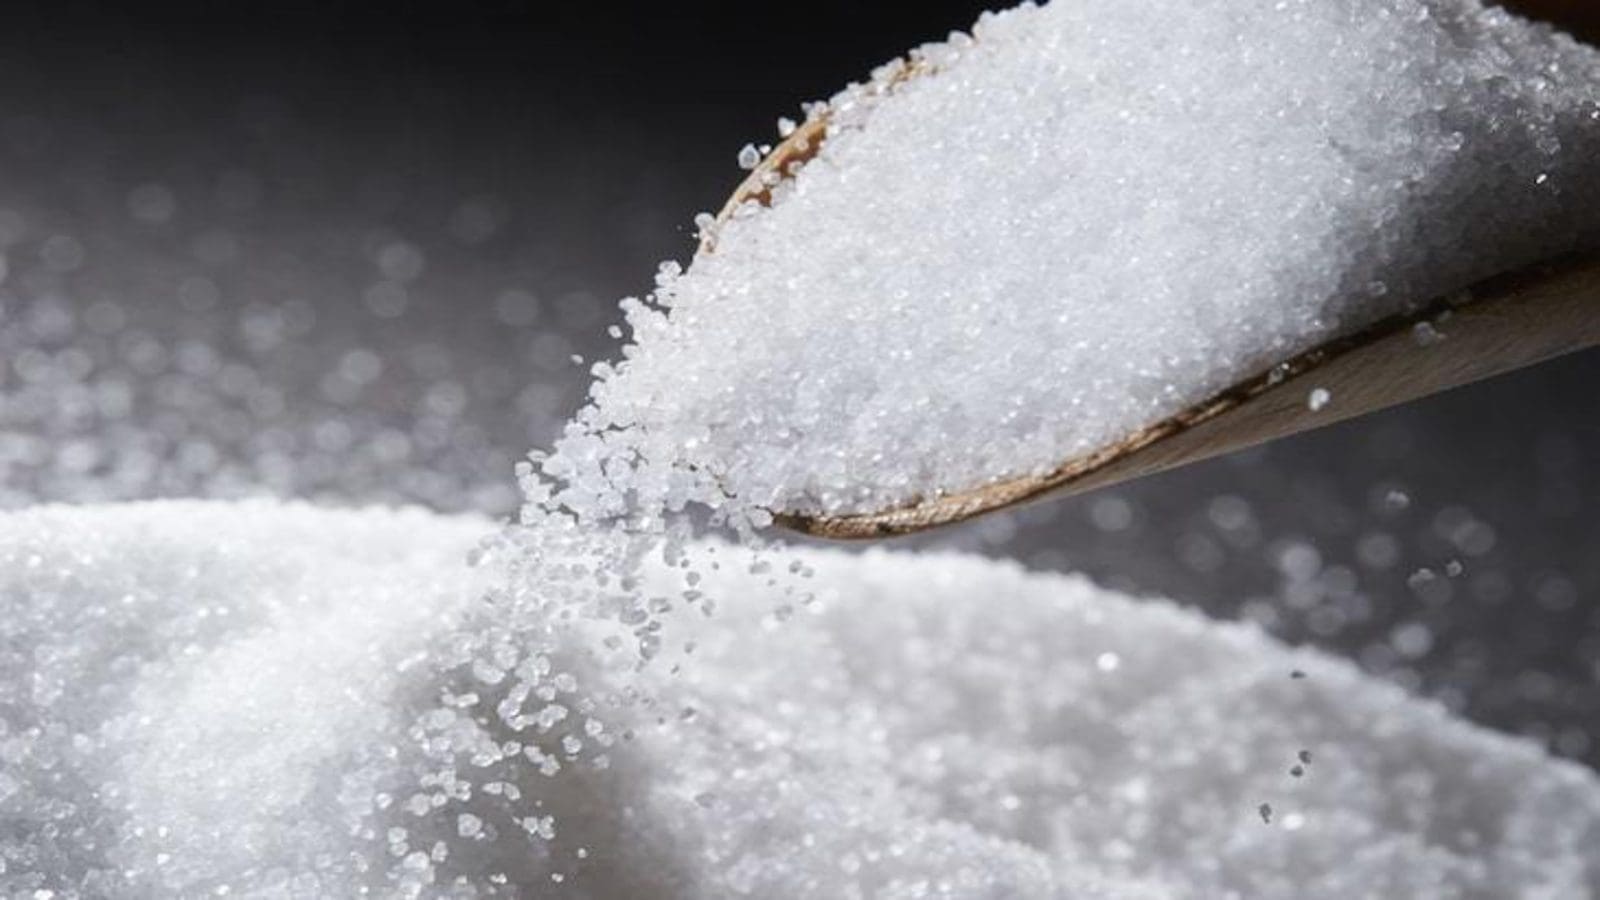 Tate & Lyle expands US allulose production to meet surging demand for natural sweeteners